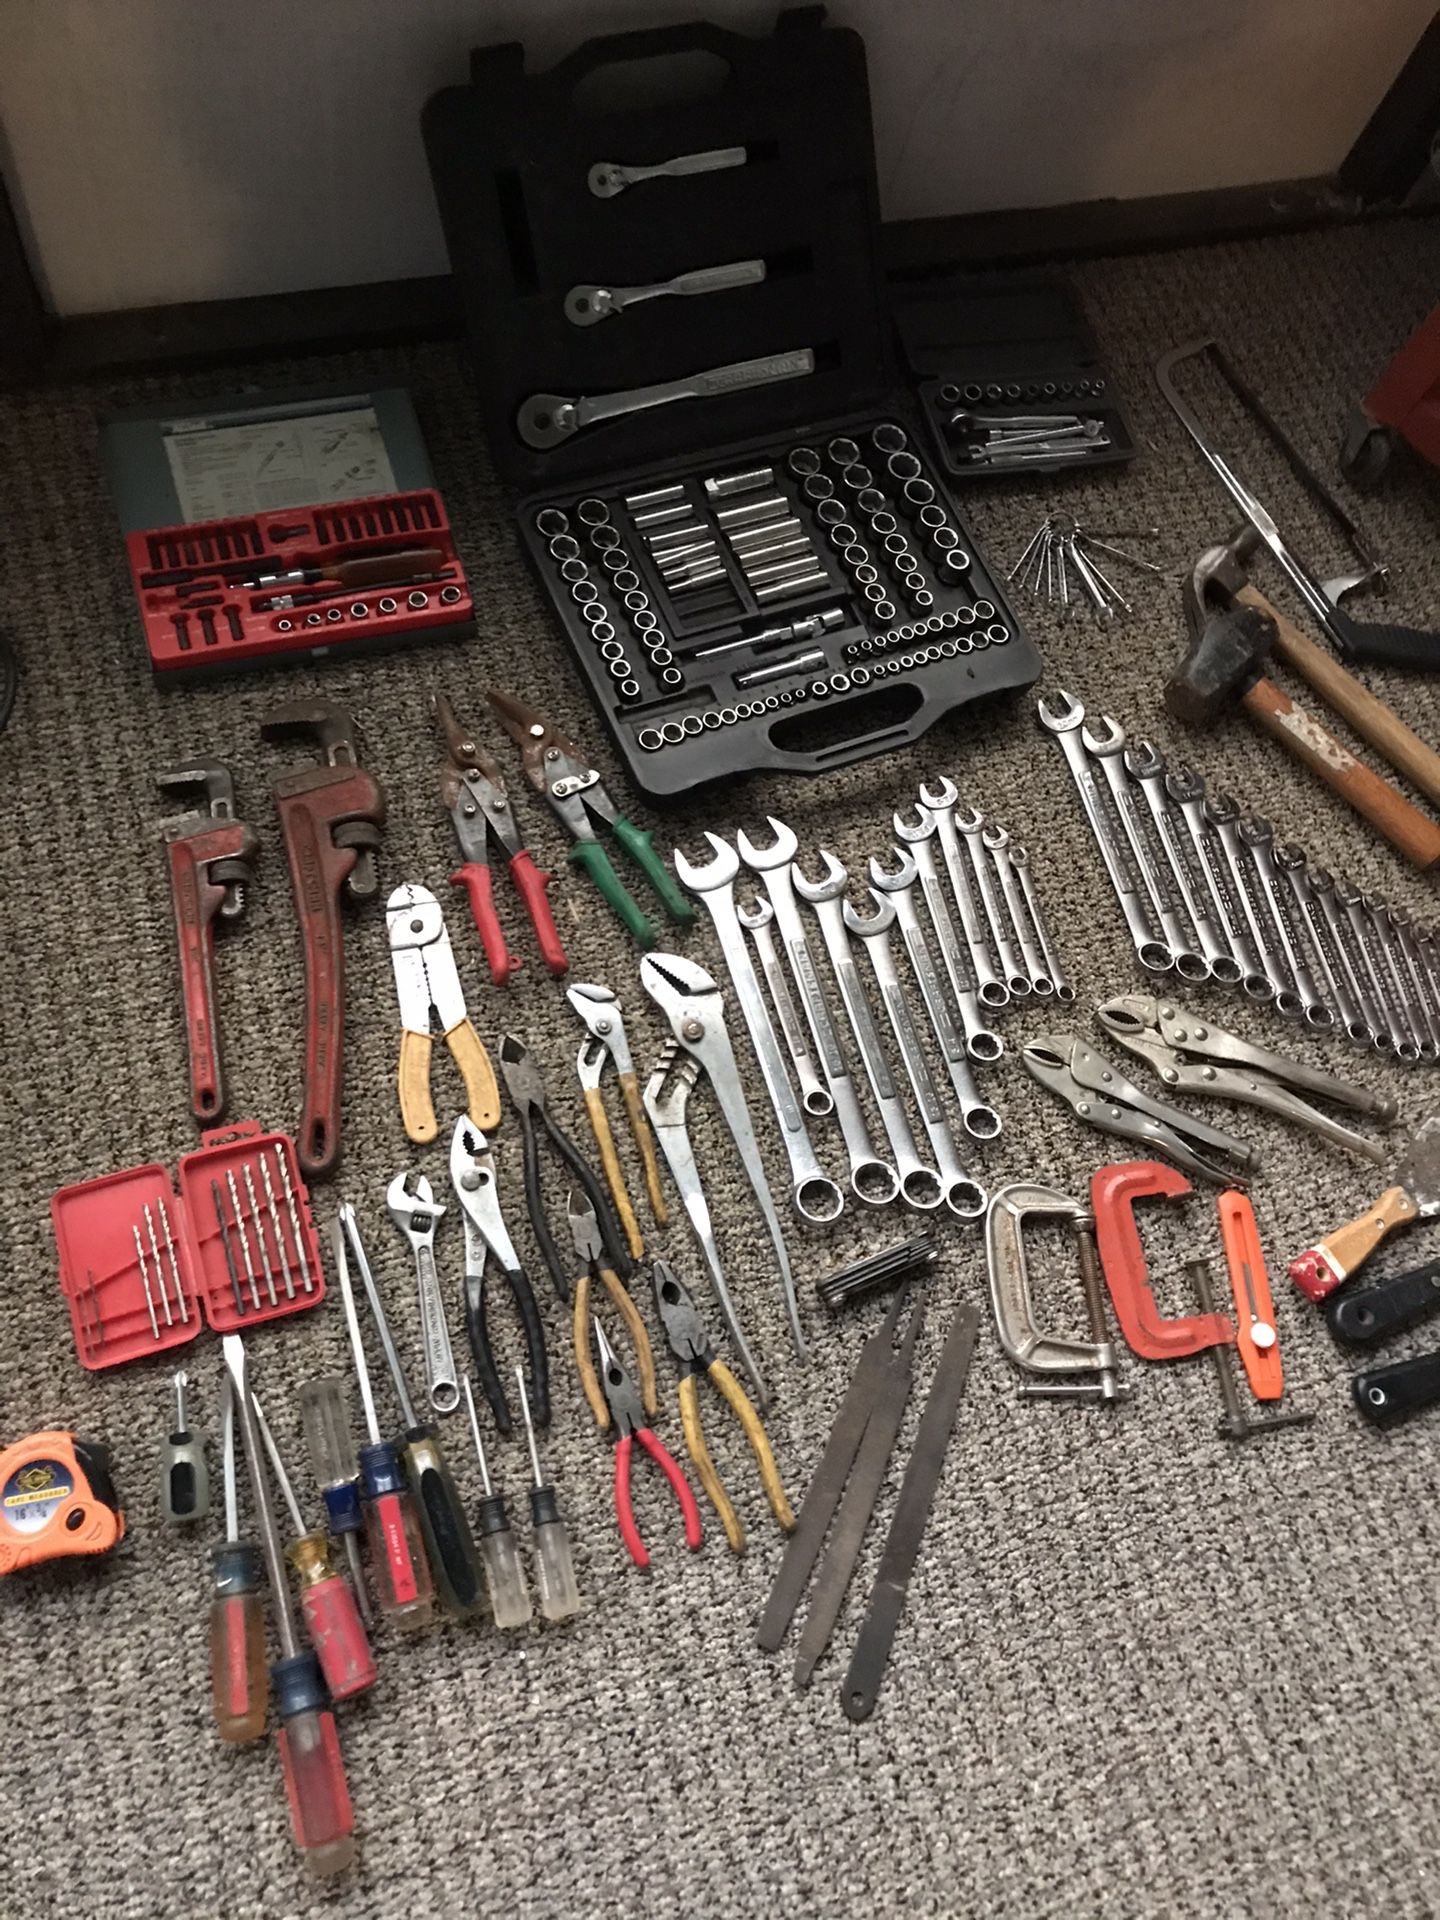 Power tools, hand tools and toolbox